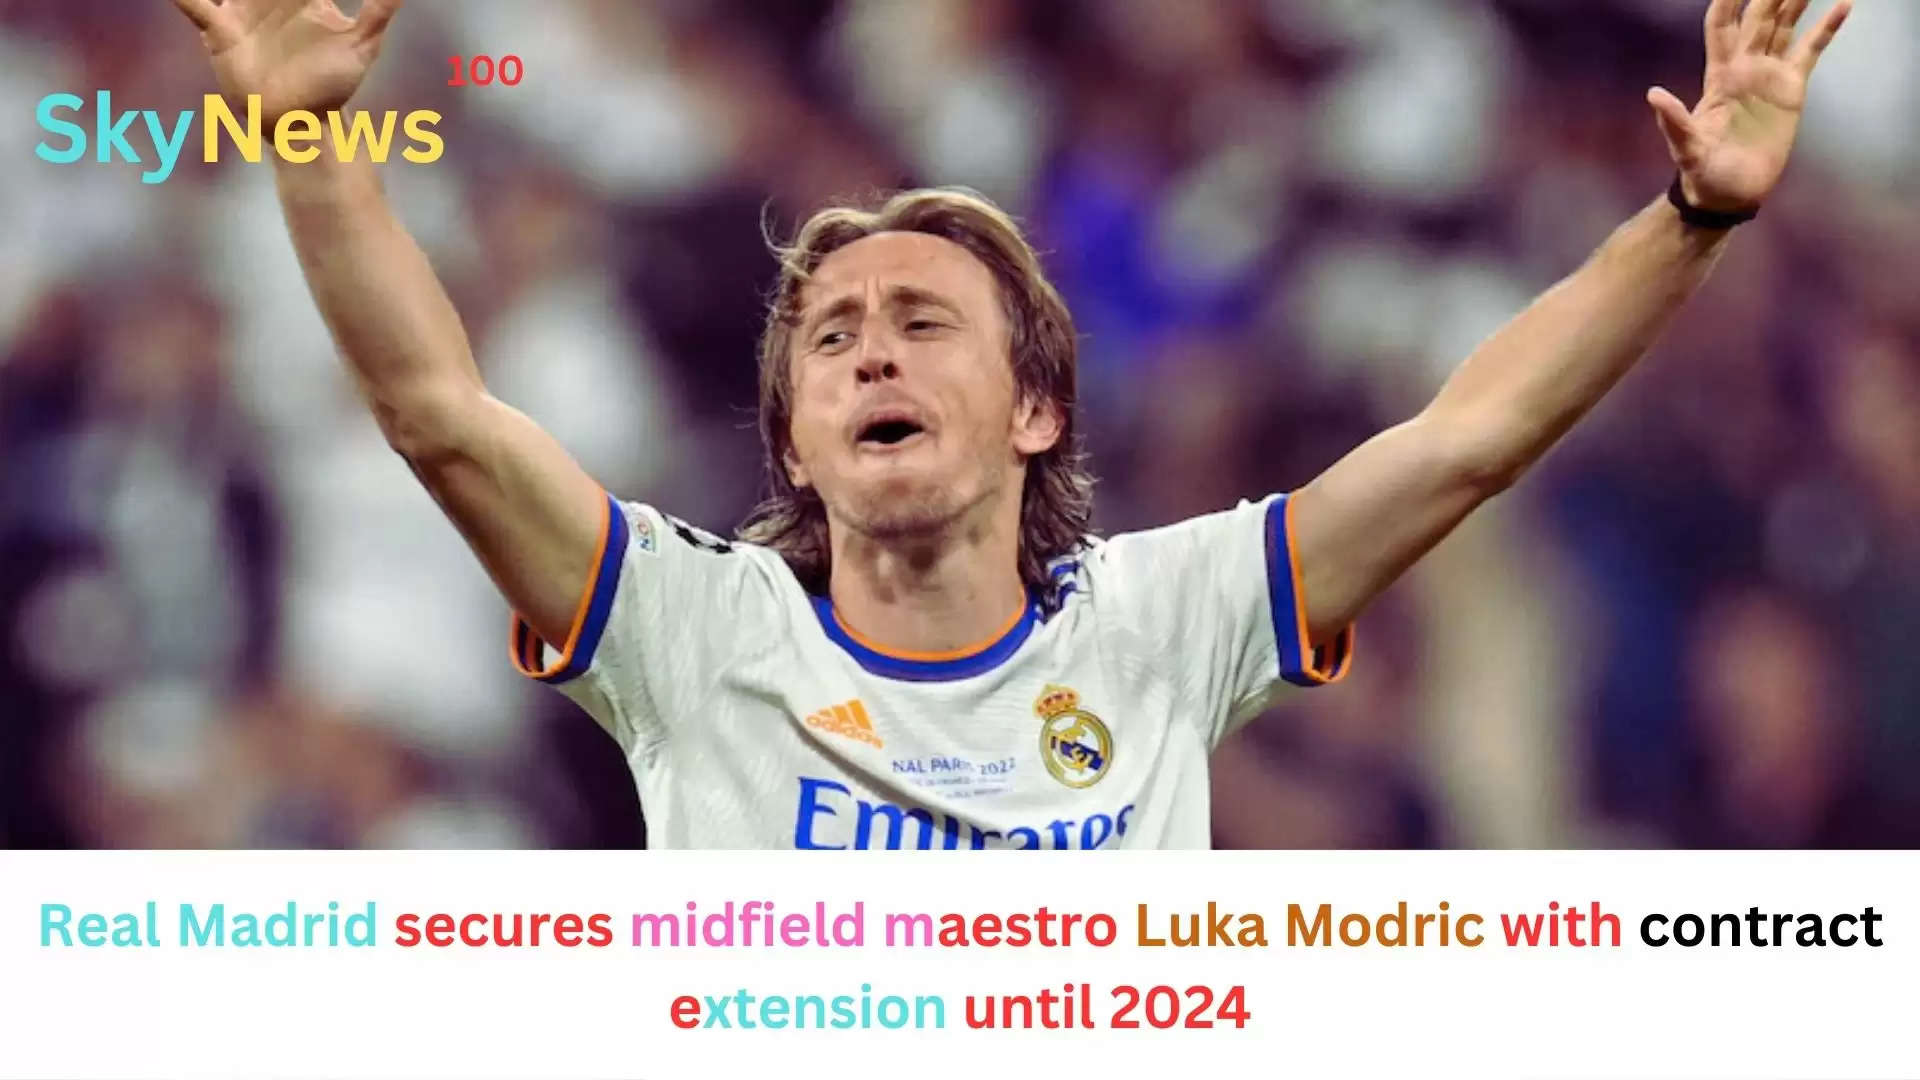 Real Madrid secures midfield maestro Luka Modric with contract extension until 2024